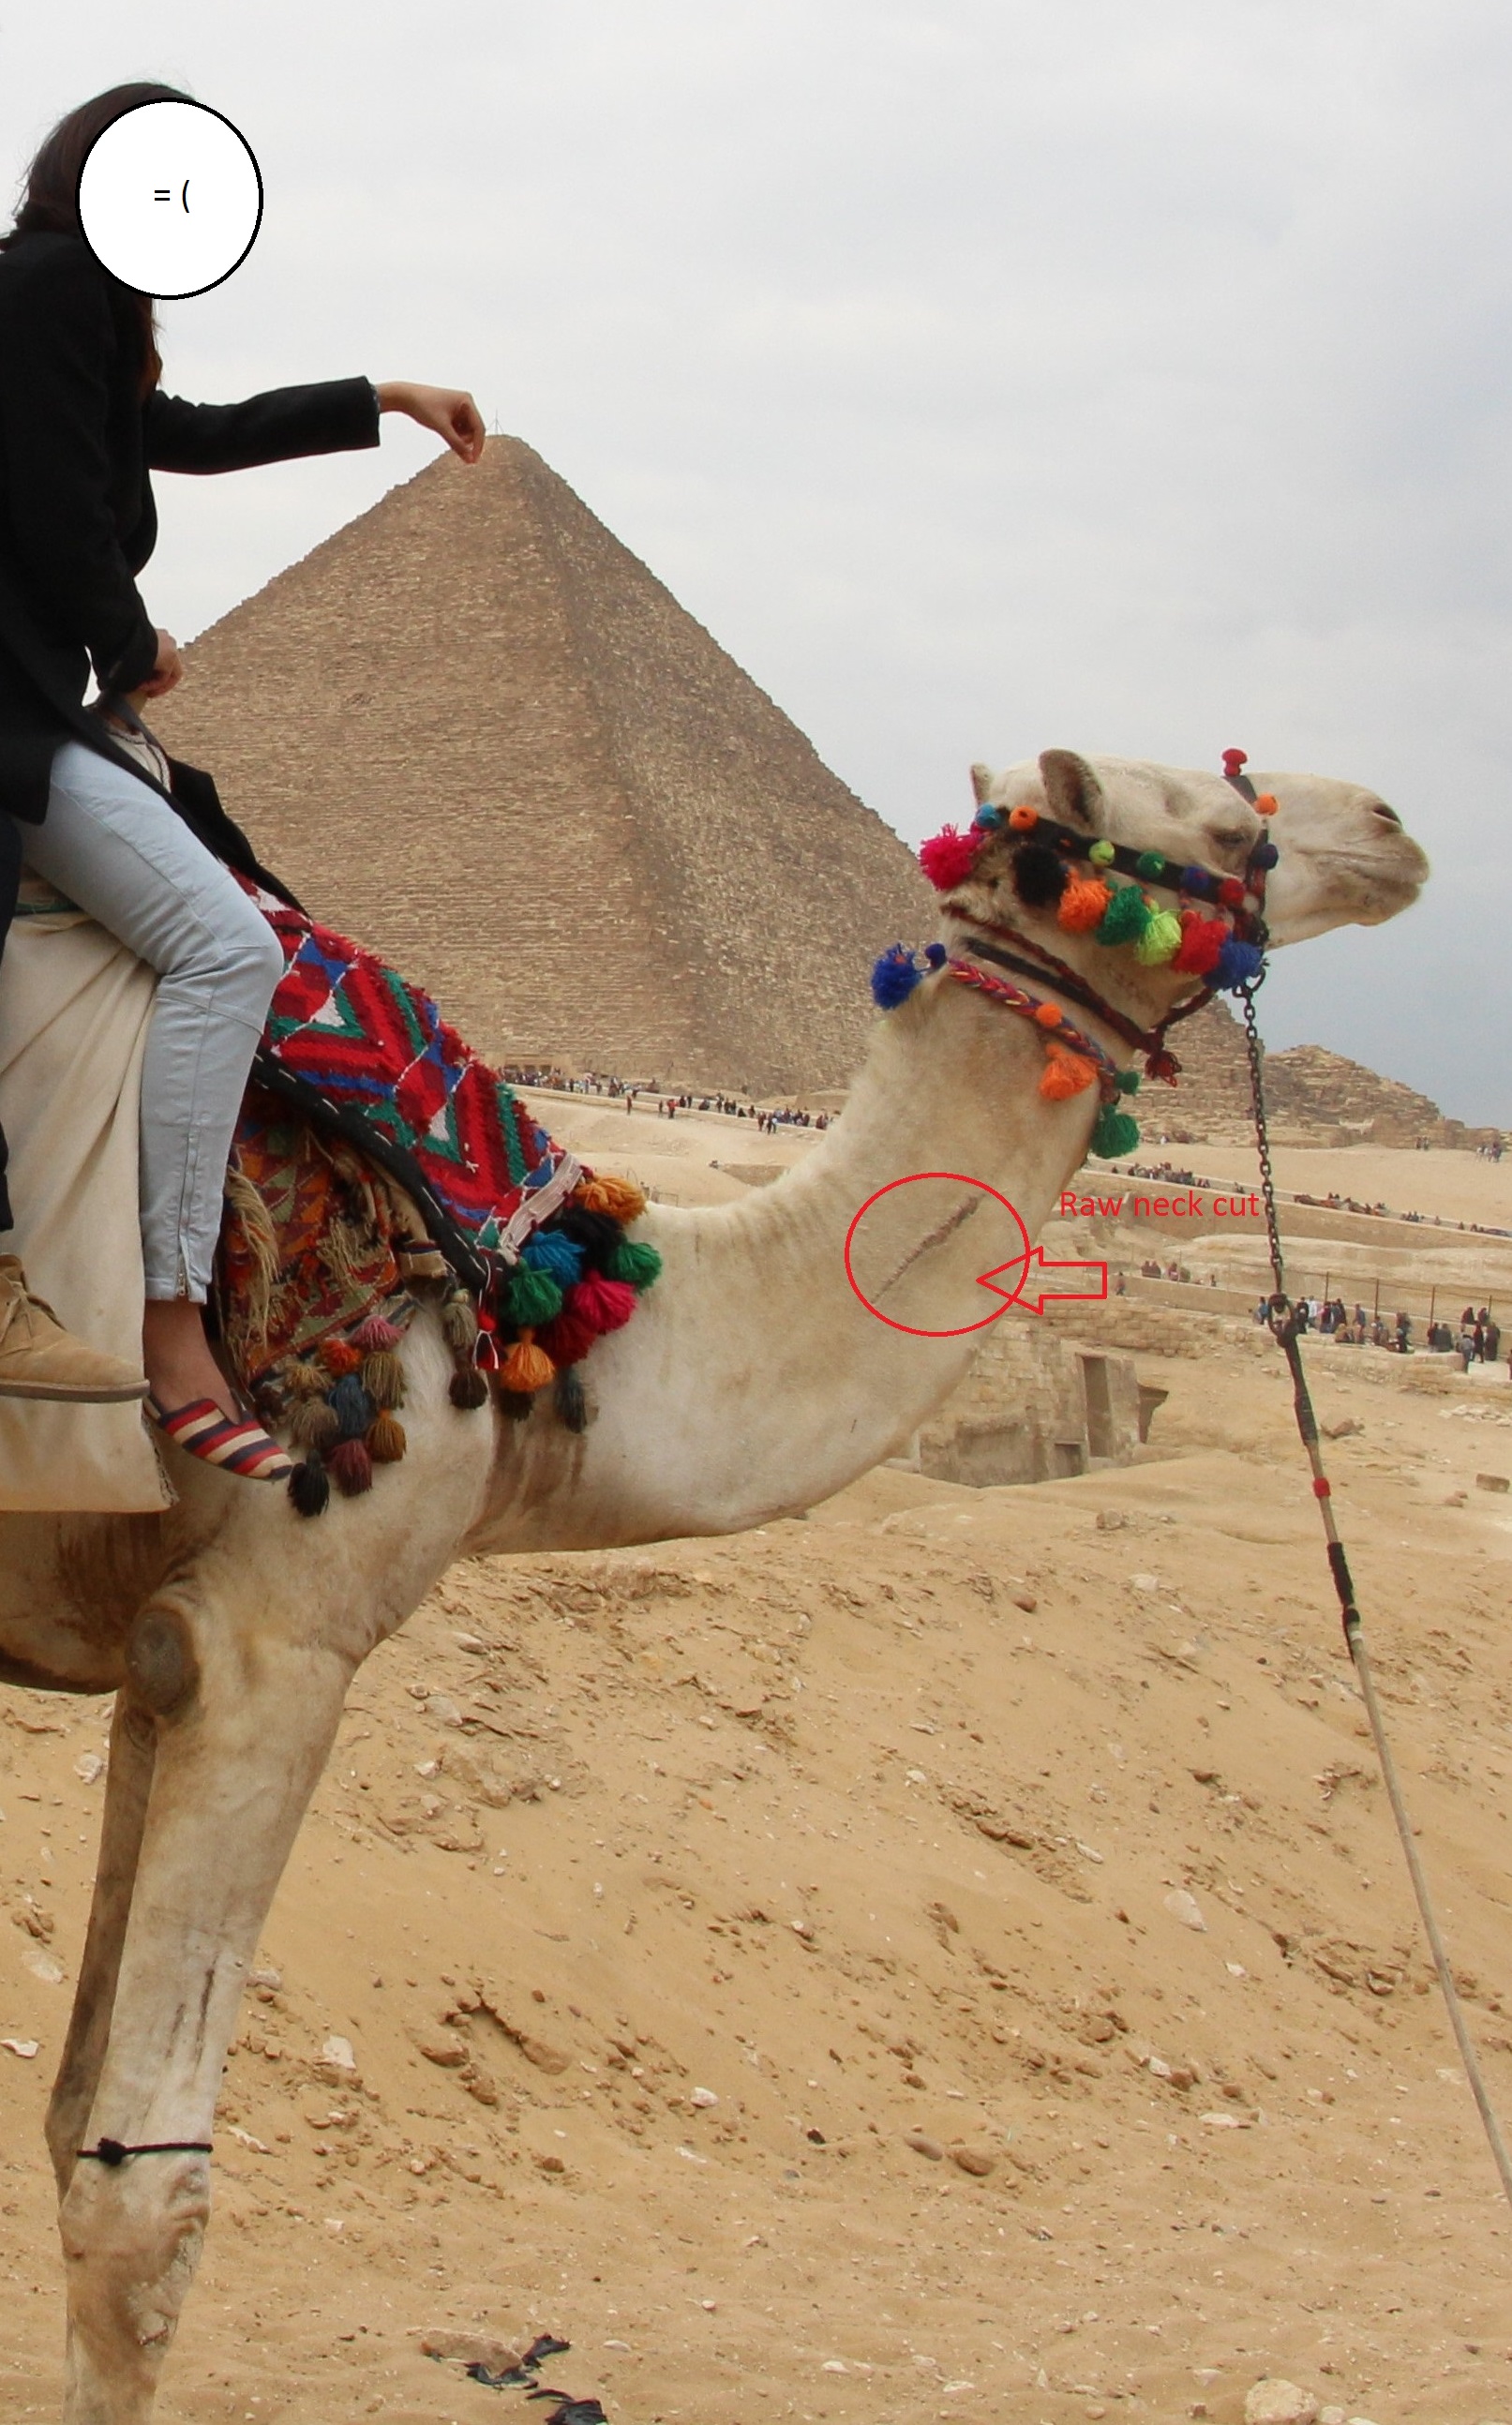 Ill treatment of camels at the Pyramids